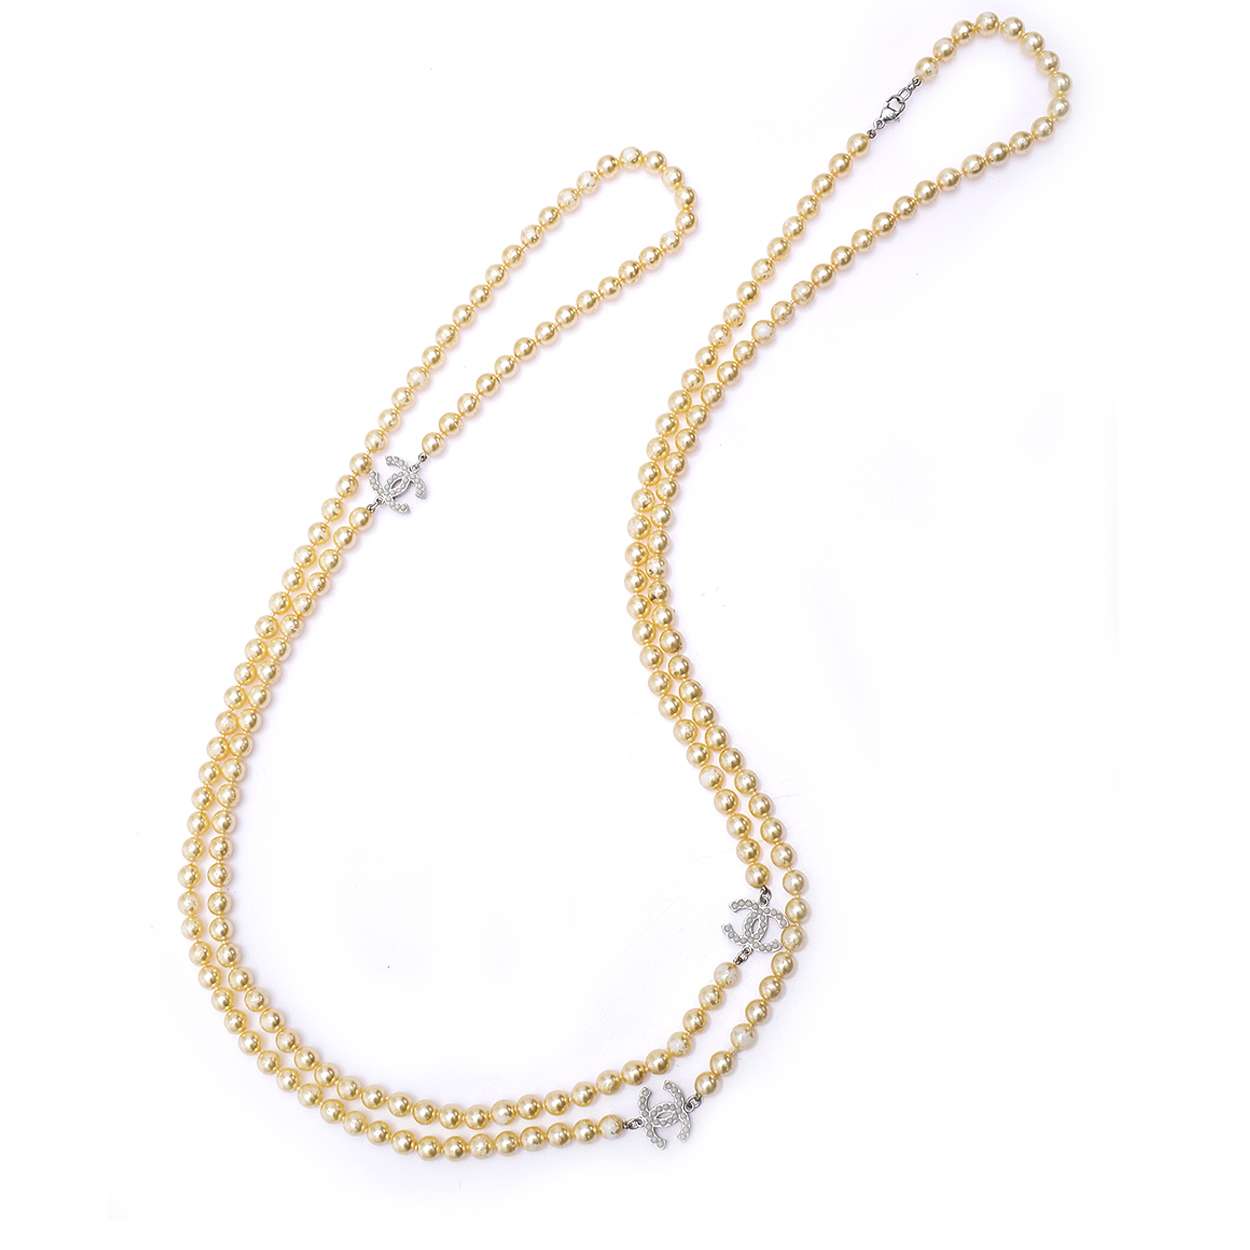 Chanel - 3 Silver Pearl Encrusted Cc Extra Long Pearl Necklace 